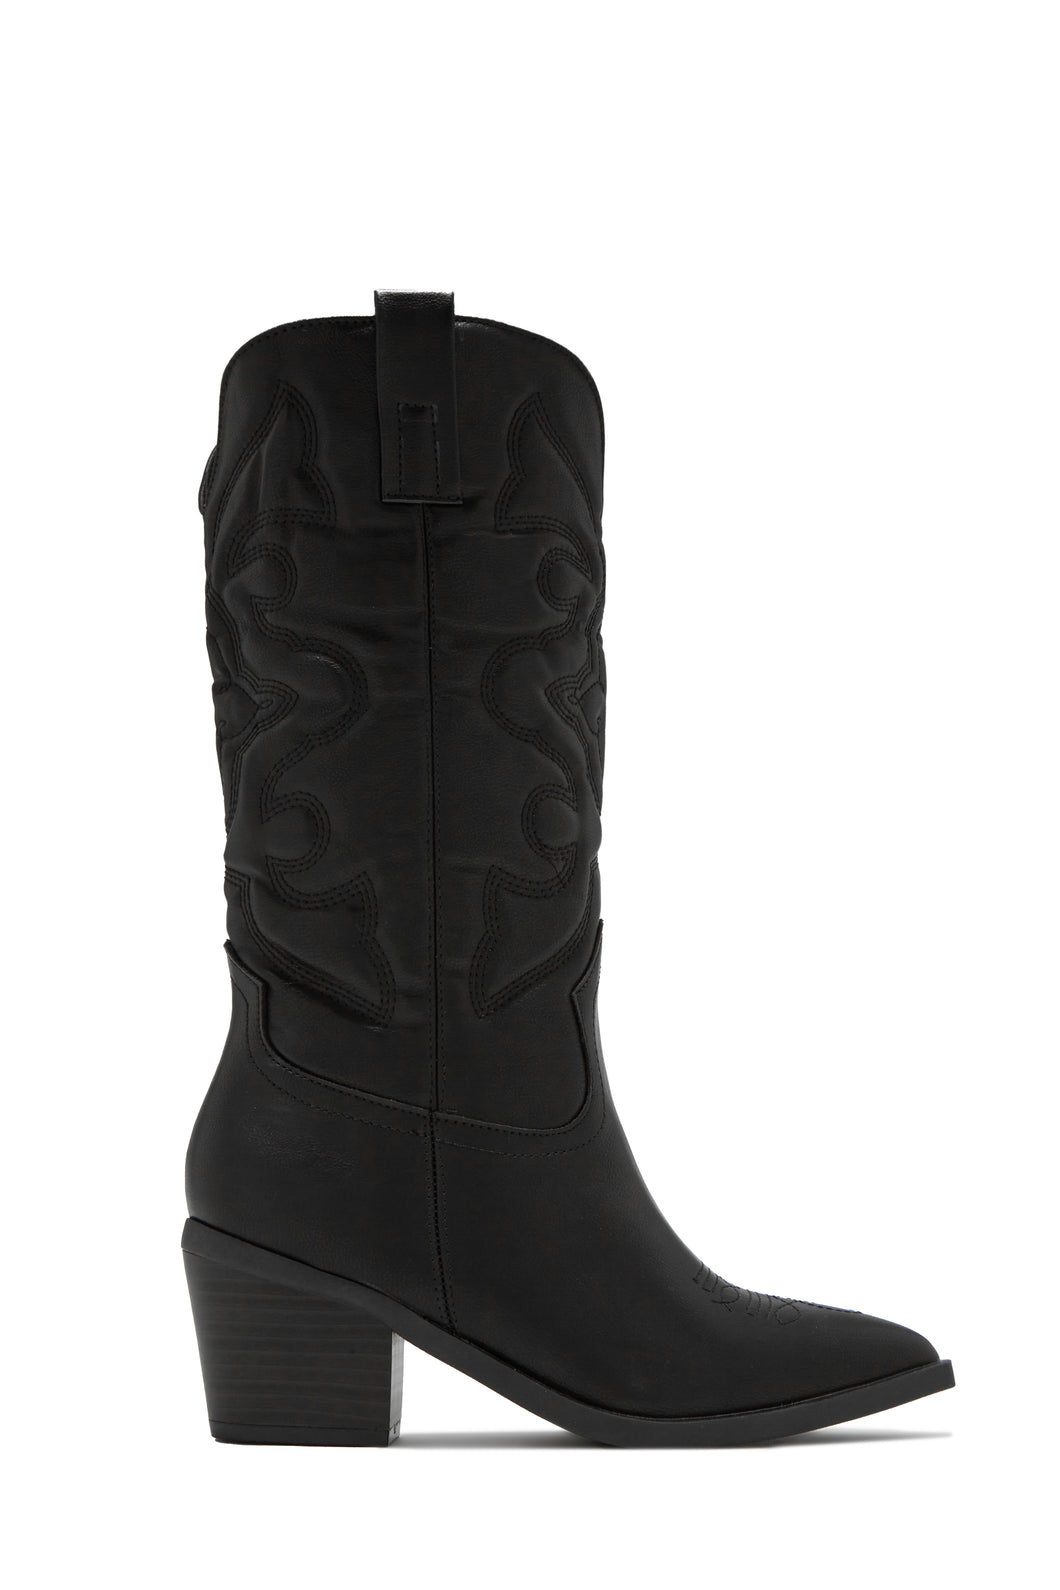 Dylan Western Cowgirl Boots - Black